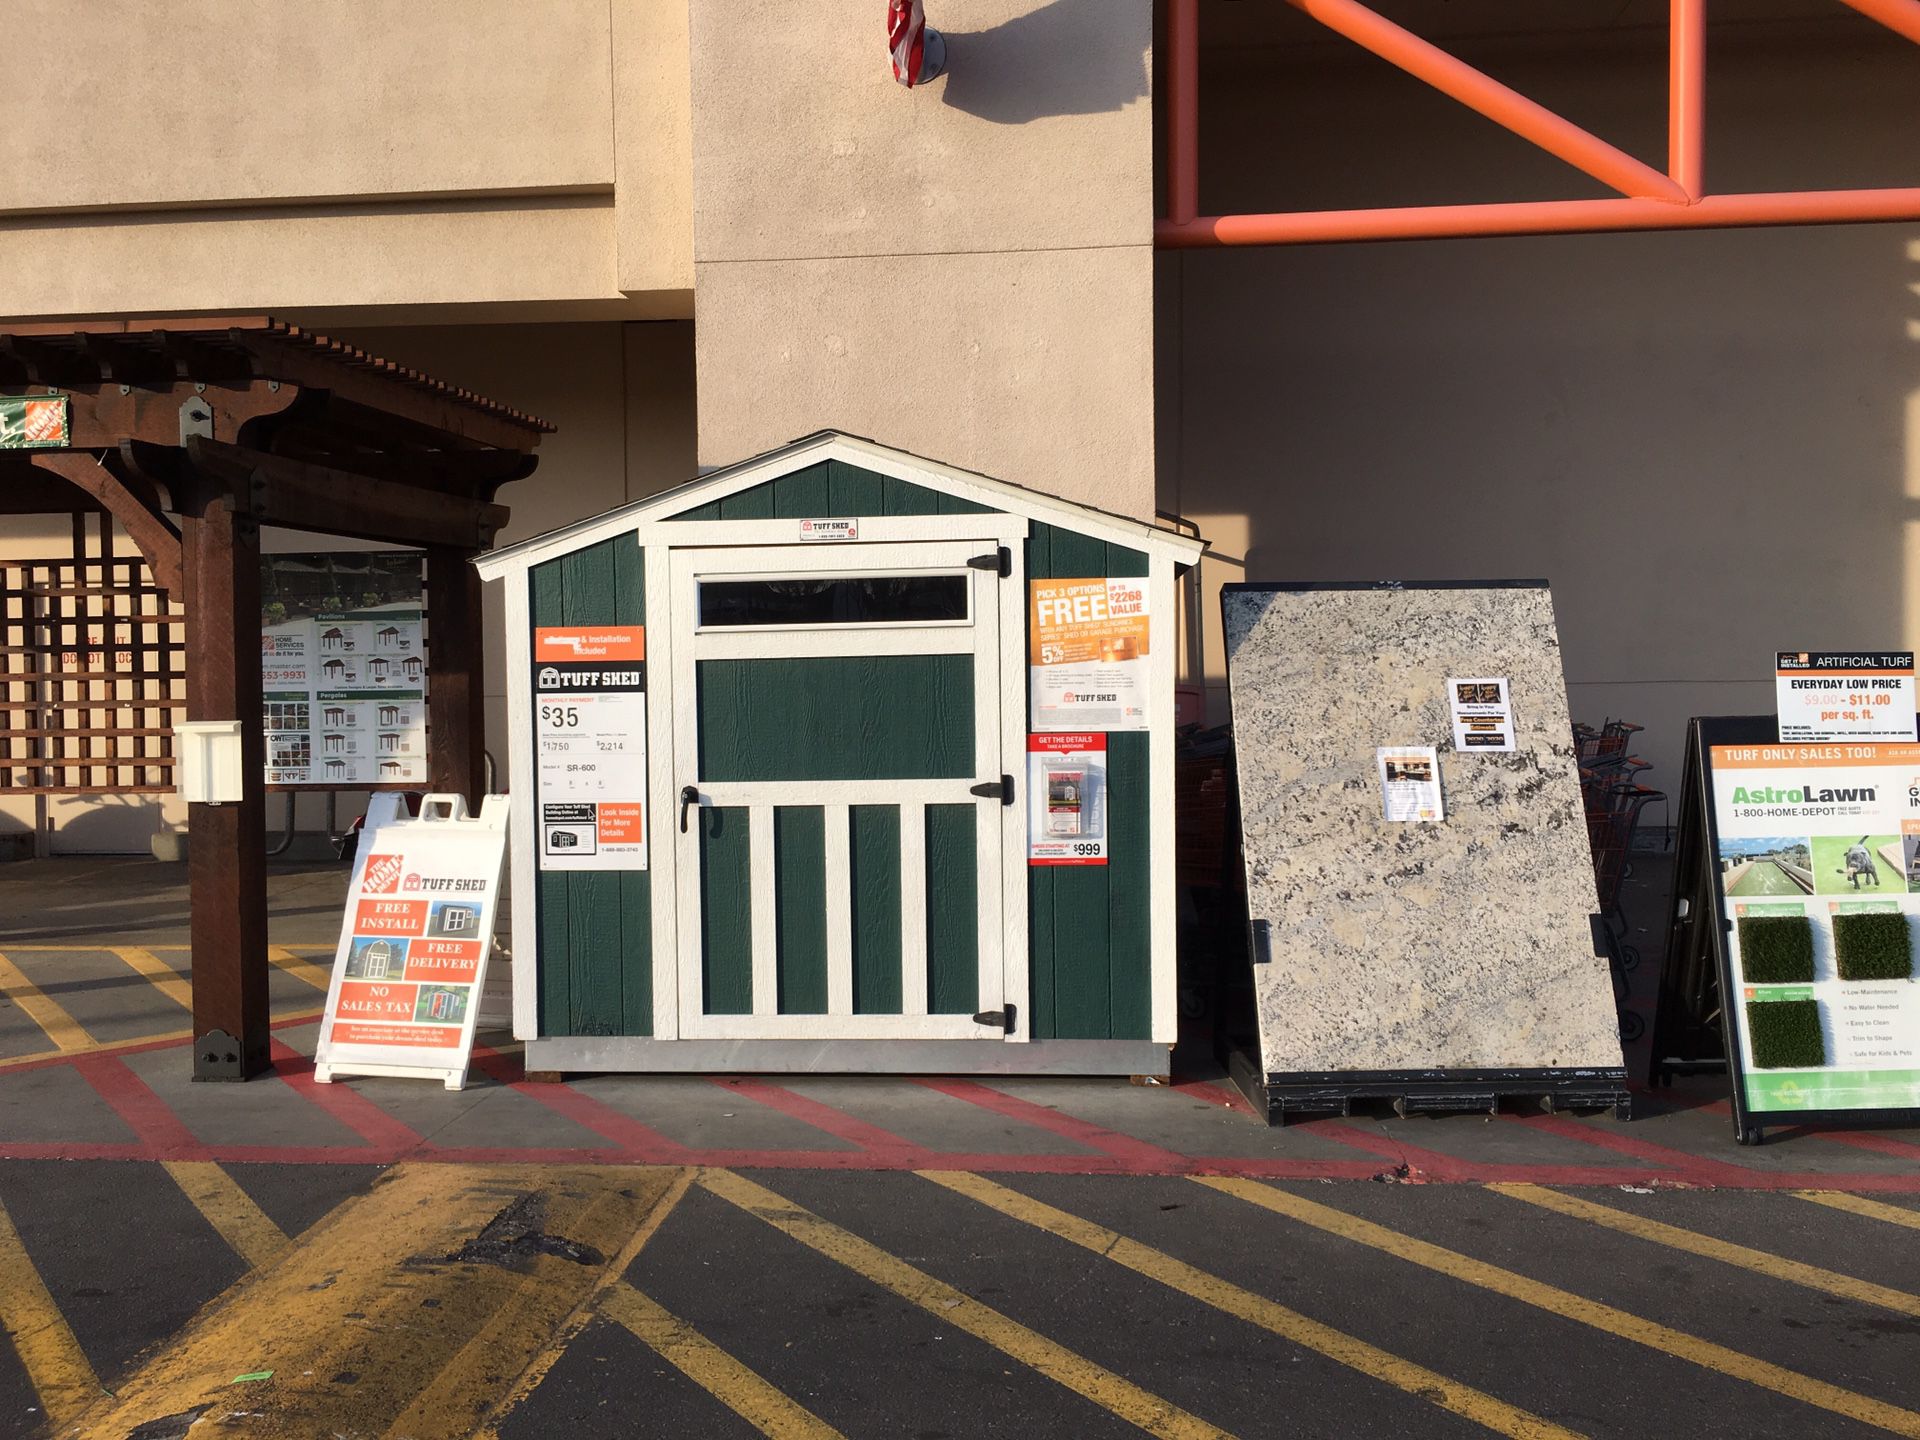 Tuff Shed Display 20% OFF!!! FREE DELIVERY!!! Financing Available!!!